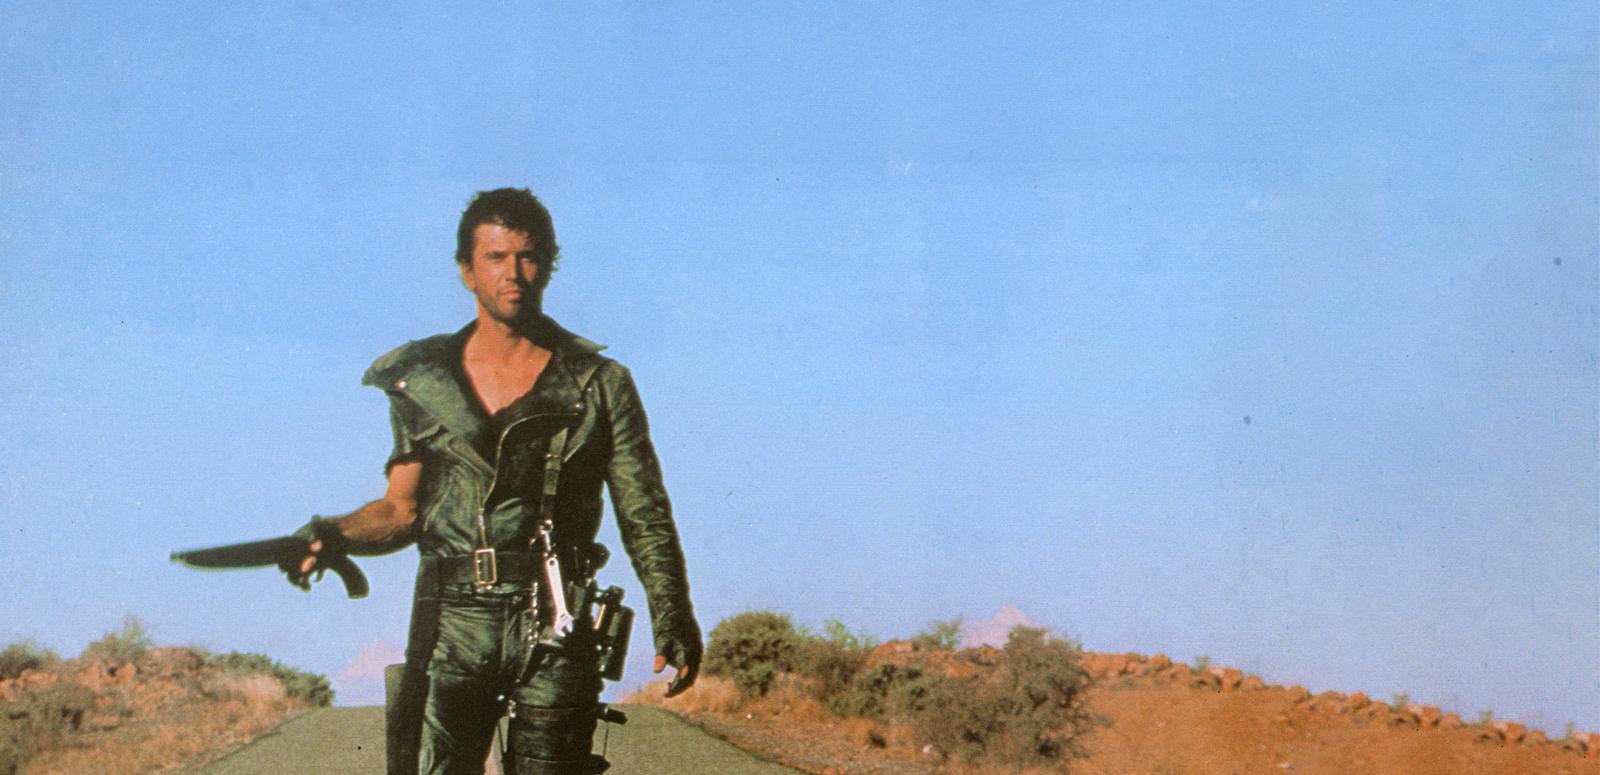 Mad Max walking resolutely down the middle of a desert highway, gun in hand